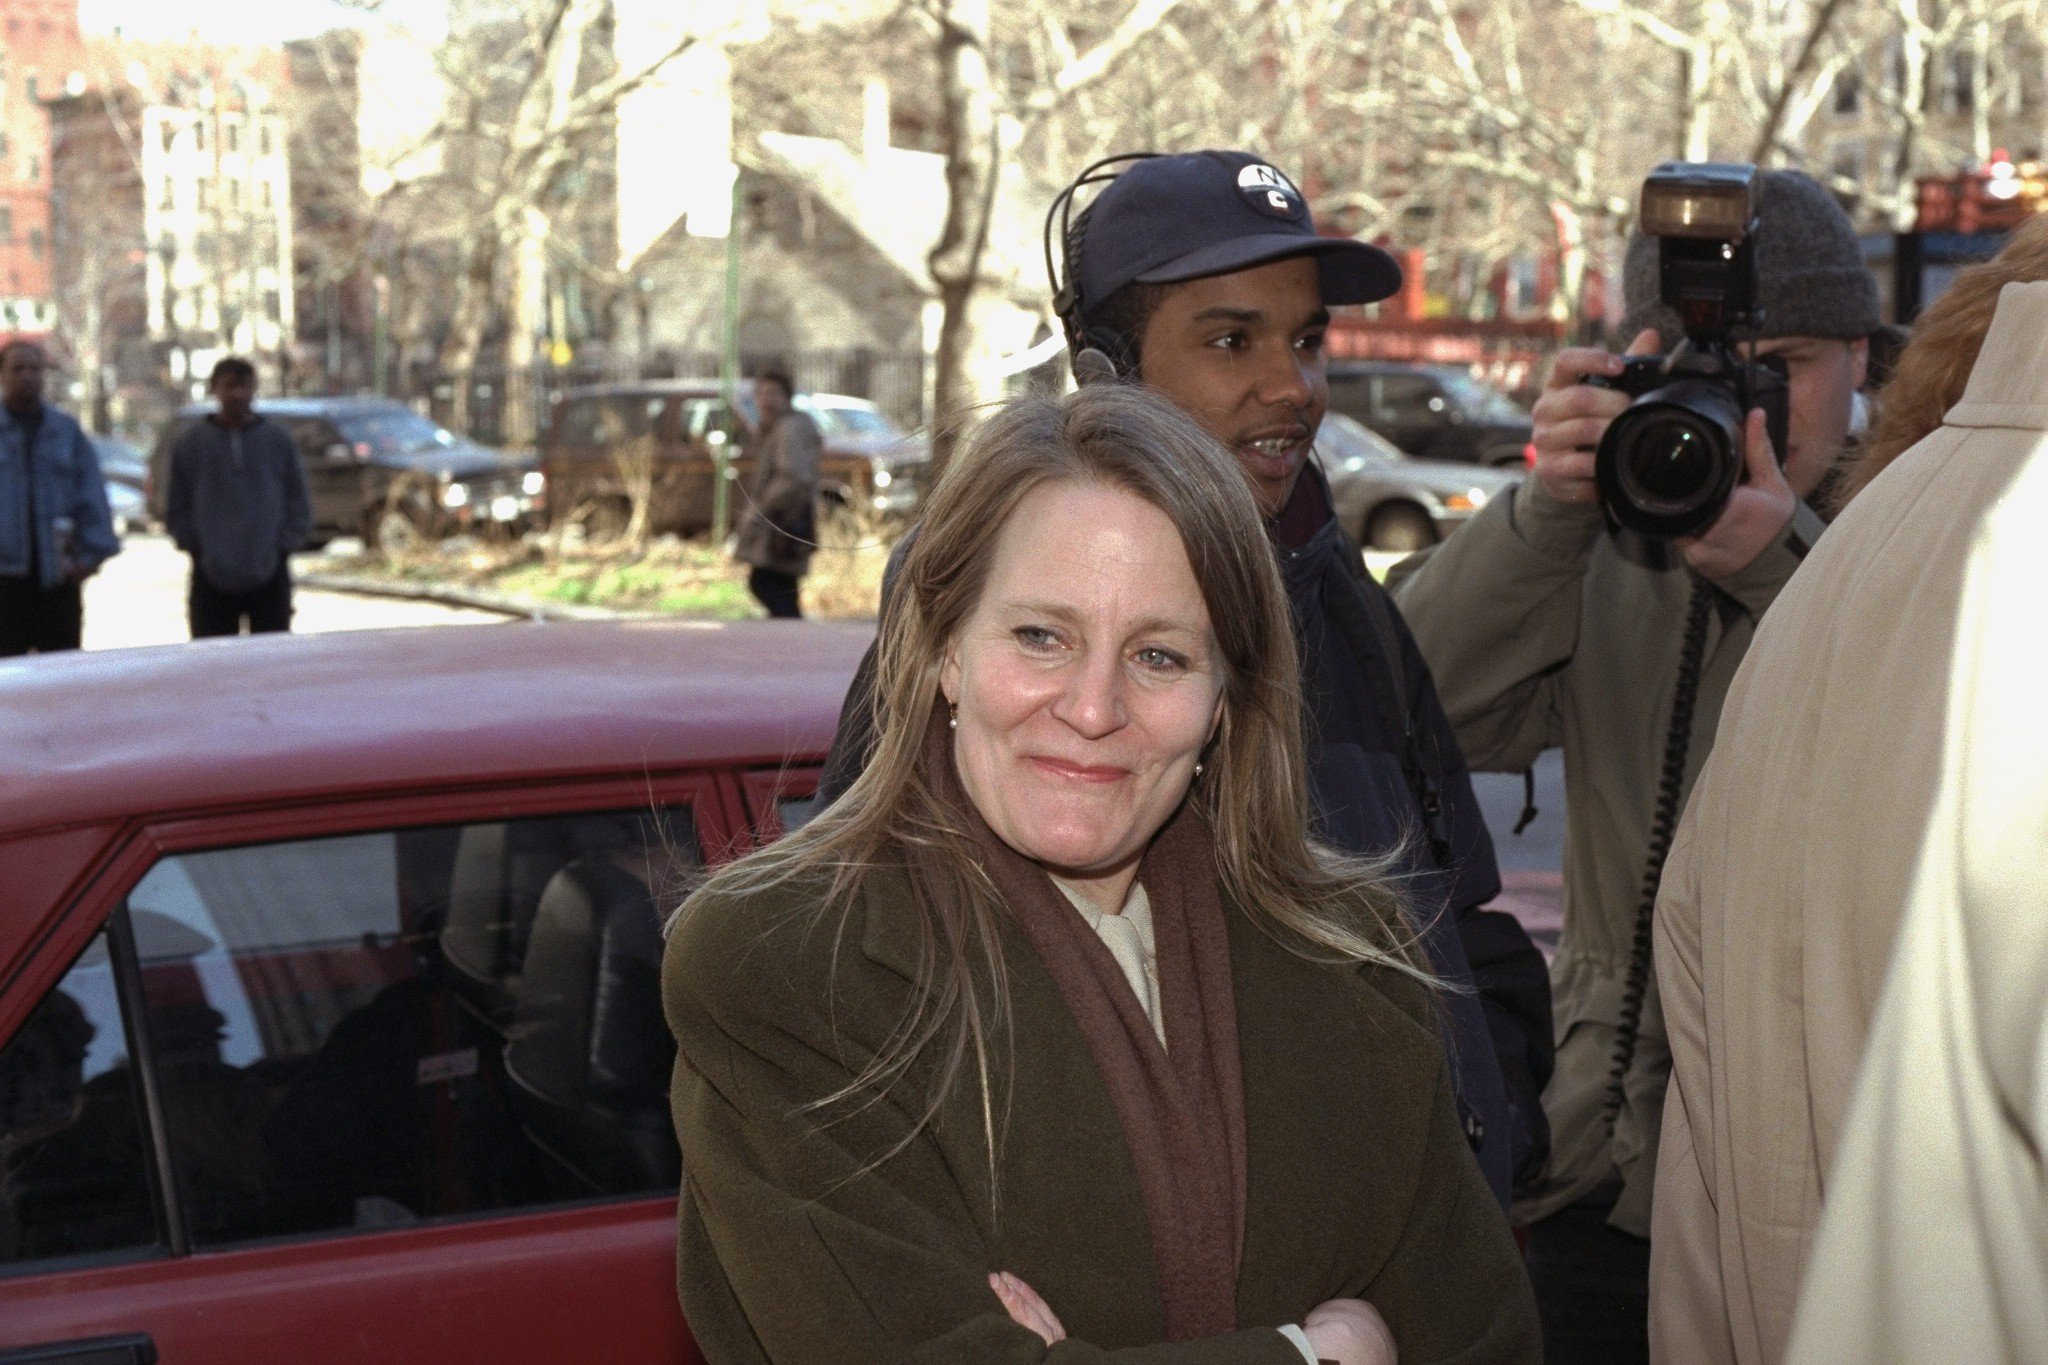 Patricia Brentrup, mother of child actor Macauley Culkin, leaves Supreme Court in Lower Manhattan after winning custody battle against ex-husband on April 1, 1997 | Source: Getty Images